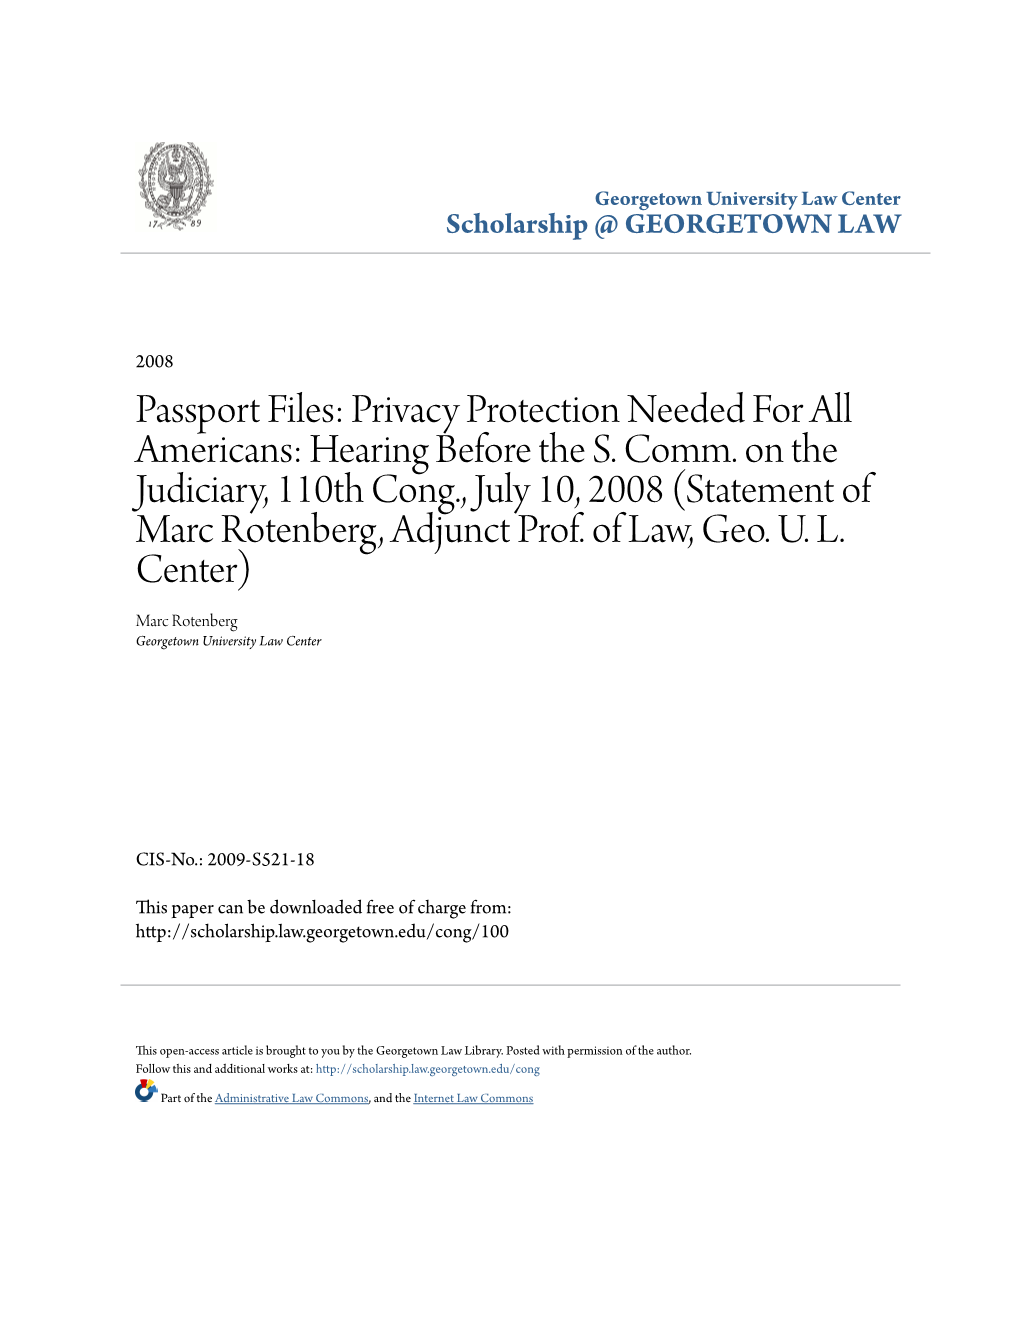 Passport Files: Privacy Protection Needed for All Americans: Hearing Before the S